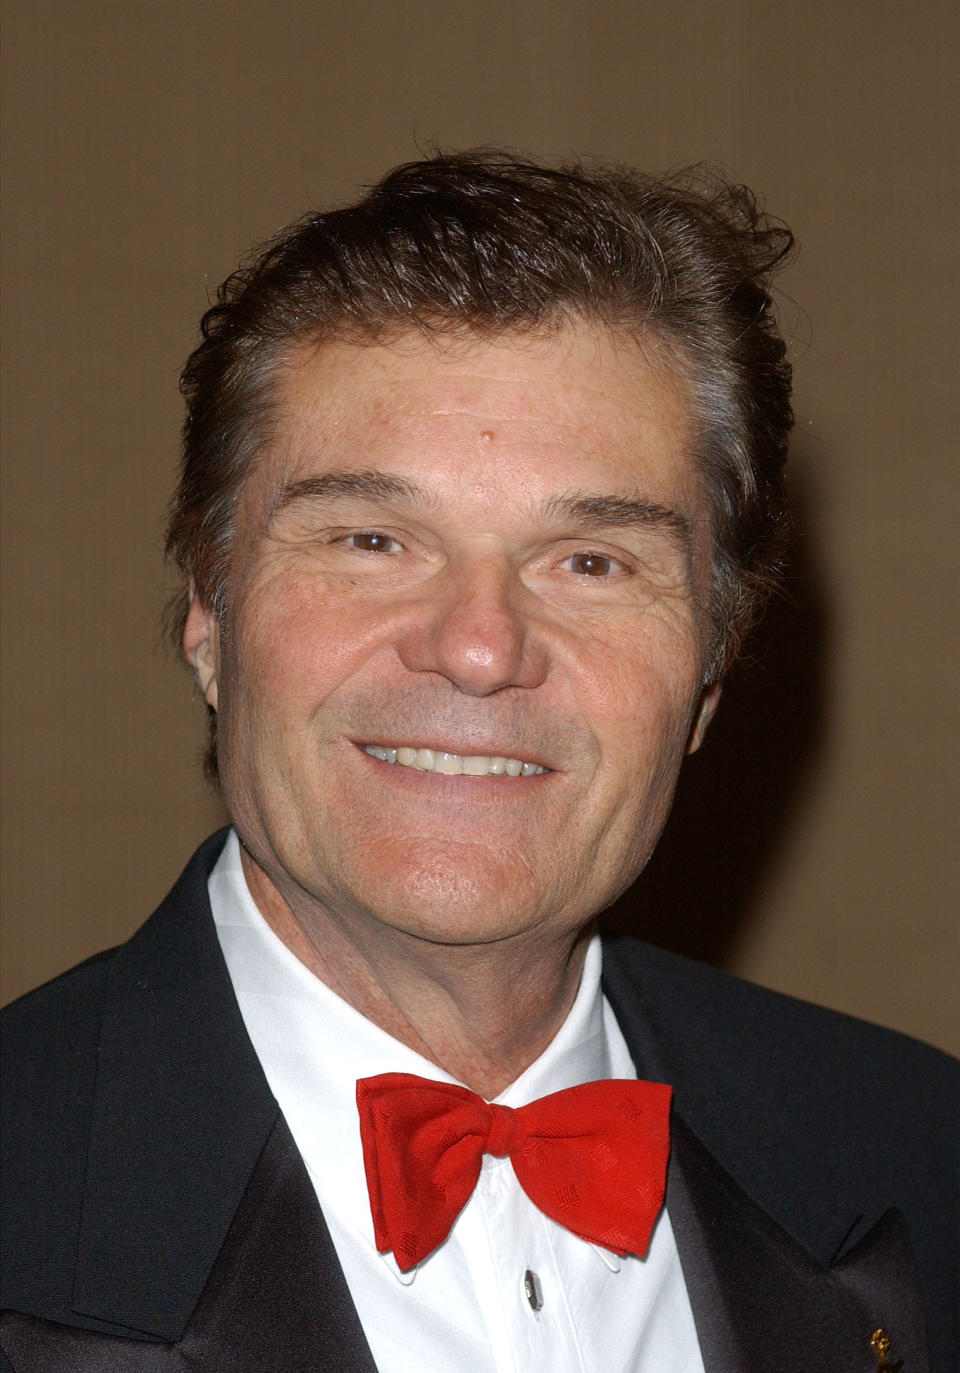 Actor Fred Willard attends the 23rd Annual College Television Awards March 17, 2002, in Los Angeles, California. (Photo by Vince Bucci/Getty Images)